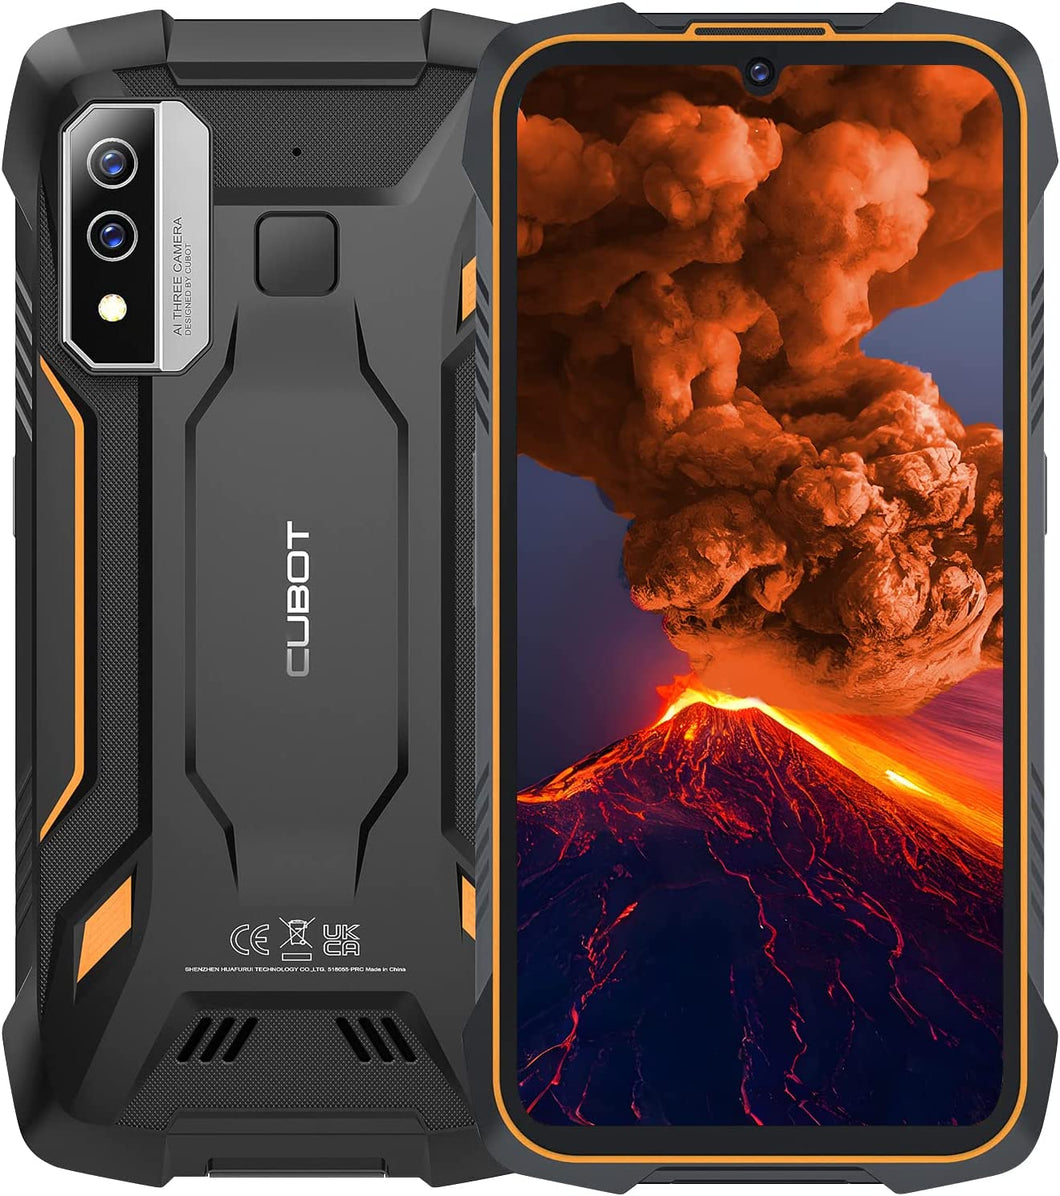 CUBOT Kingkong 6 Rugged Mobile 2023, 4GB+64GB/TF 128GB Mobile Phone, 6.1''HD Android 11 Smartphone, 5000mAh Battery 16MP+8MP Camera, Dual SIM 4G/Face ID/NFC/OTG/GPS/IP68&IP69K All-terrain Mobile (NEW from exposure)